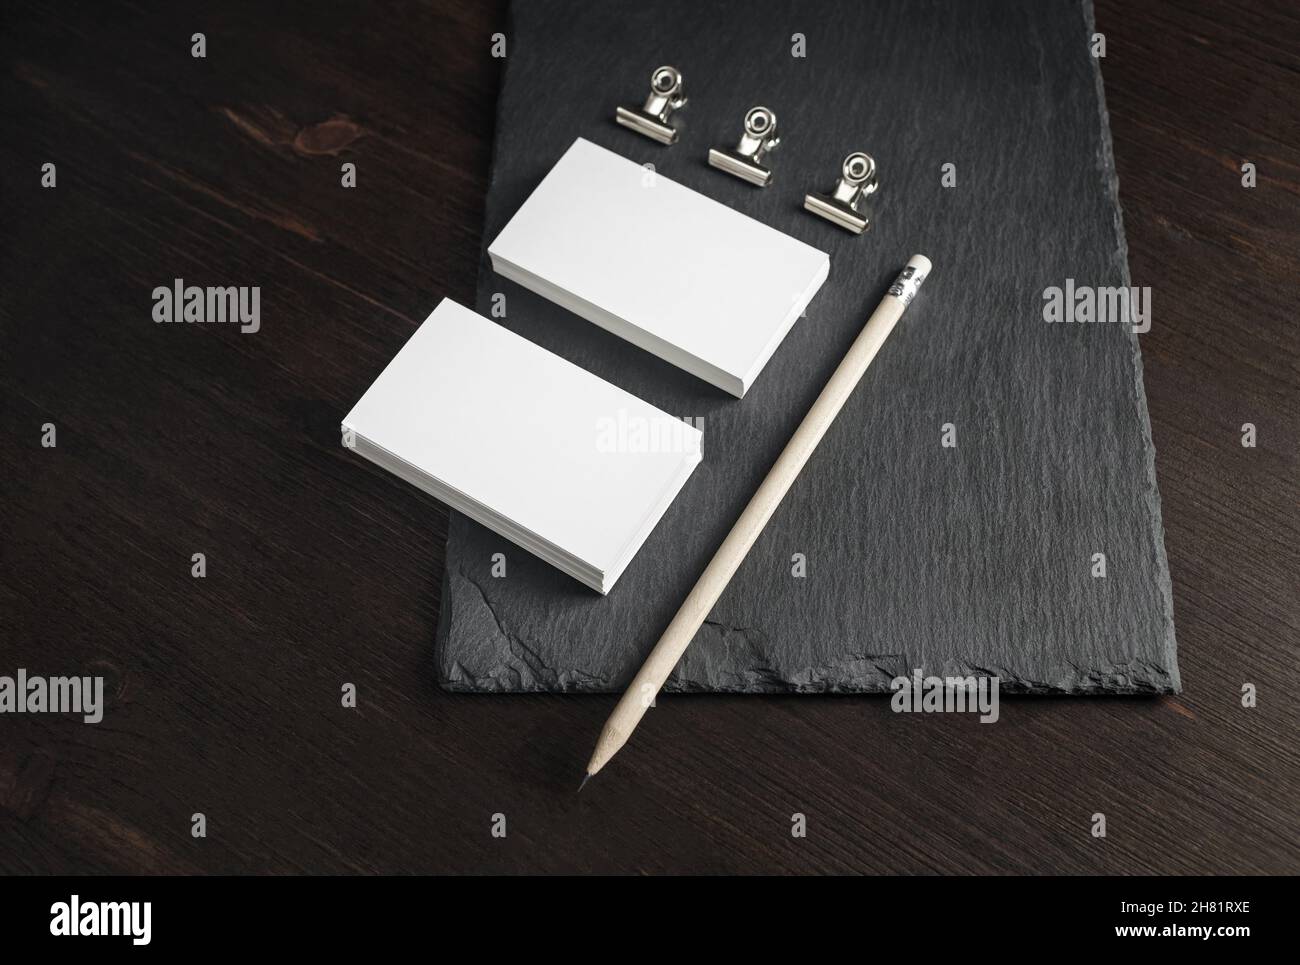 Two stacks of blank business cards, pencil and metal clamps on stone board background. Copy space. Stock Photo